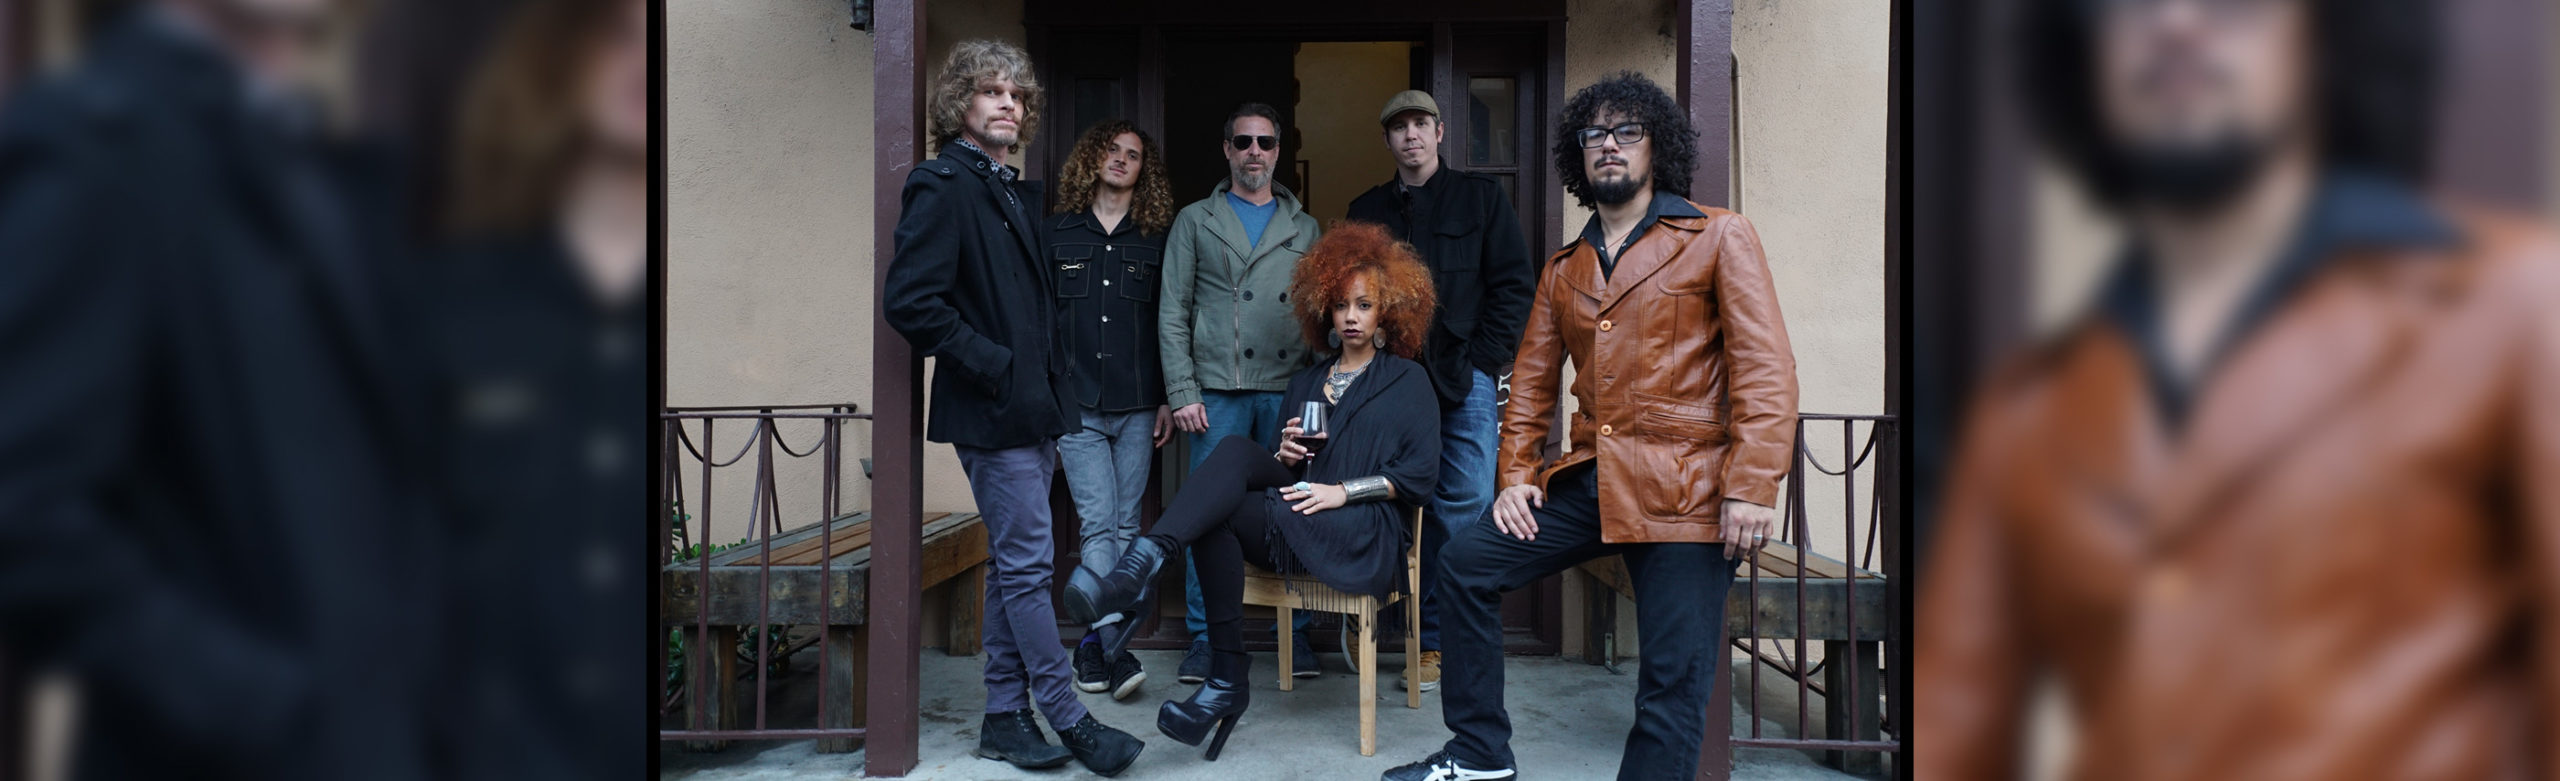 Orgone Performs Trail 103.3 Live Session from the Top Hat Image